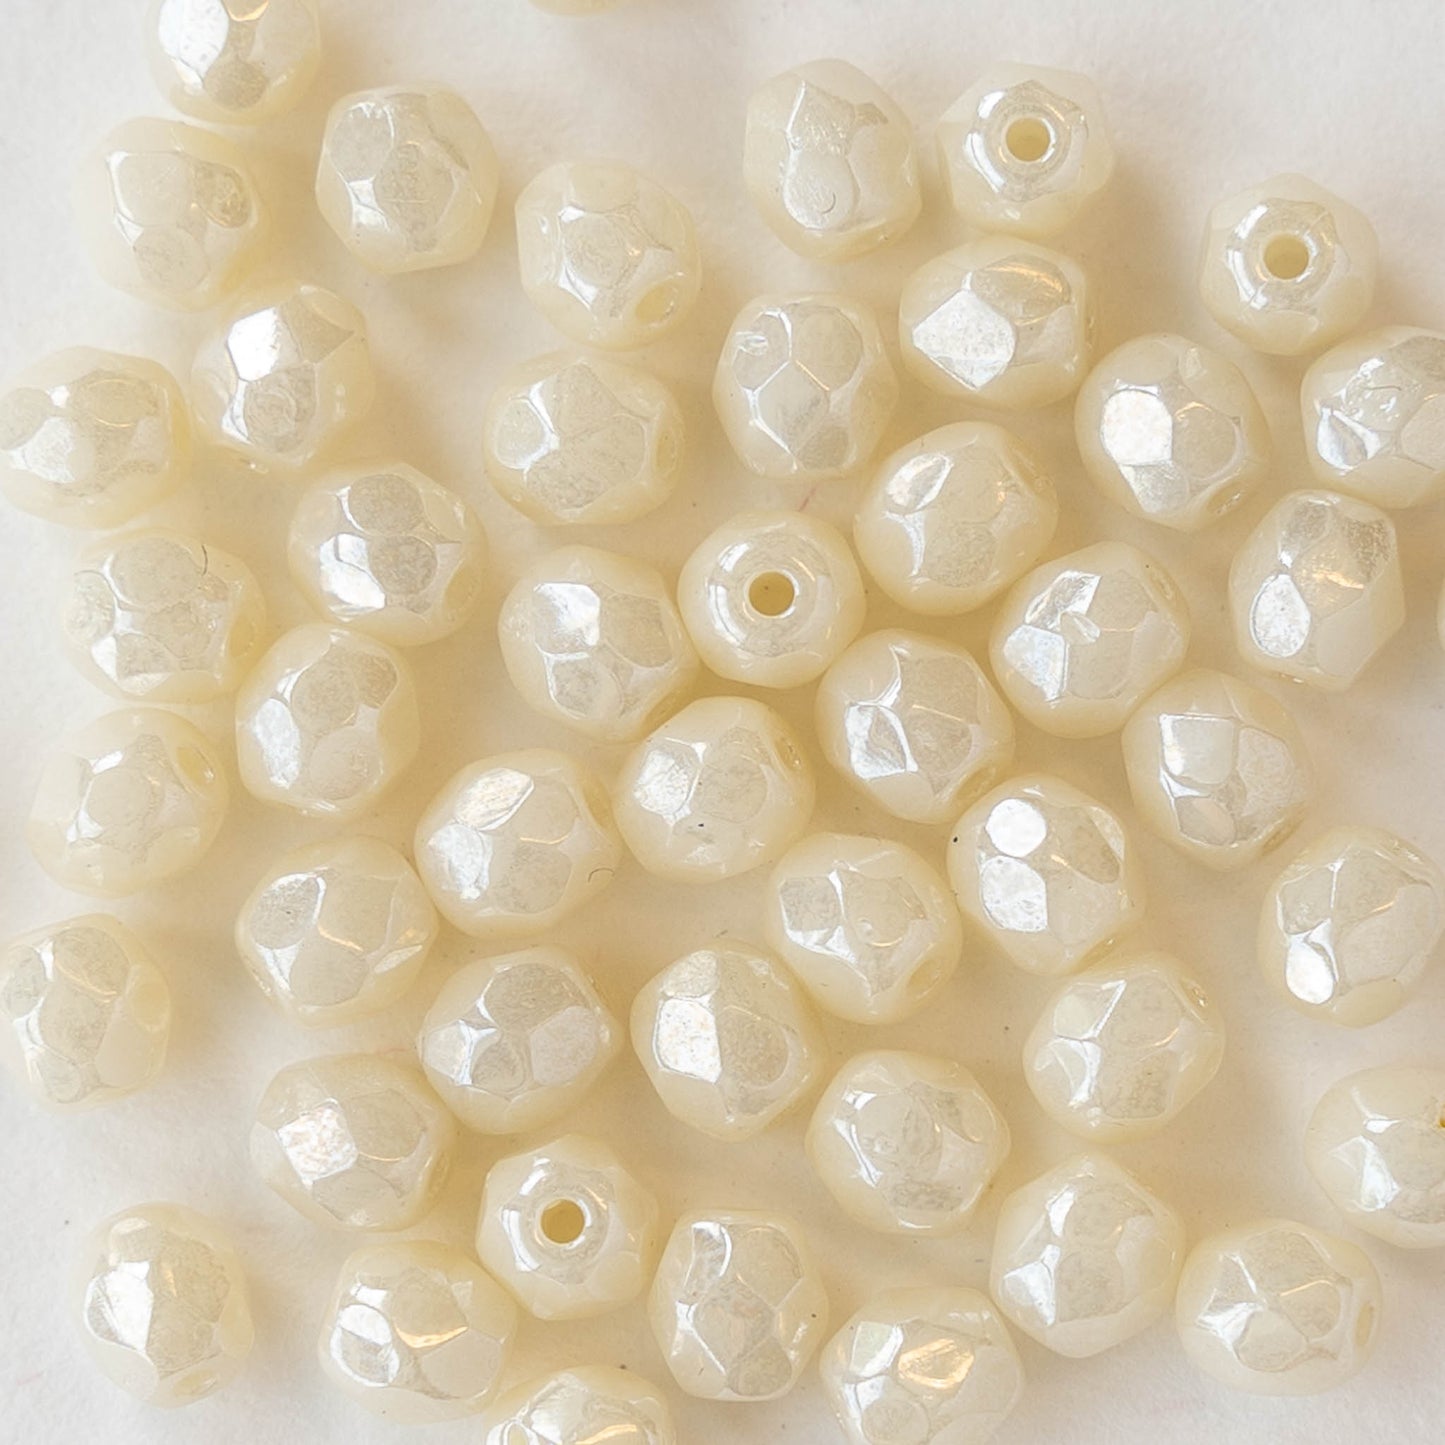 Load image into Gallery viewer, 4mm Round Firepolished Beads - Ivory Luster- 50 Beads
